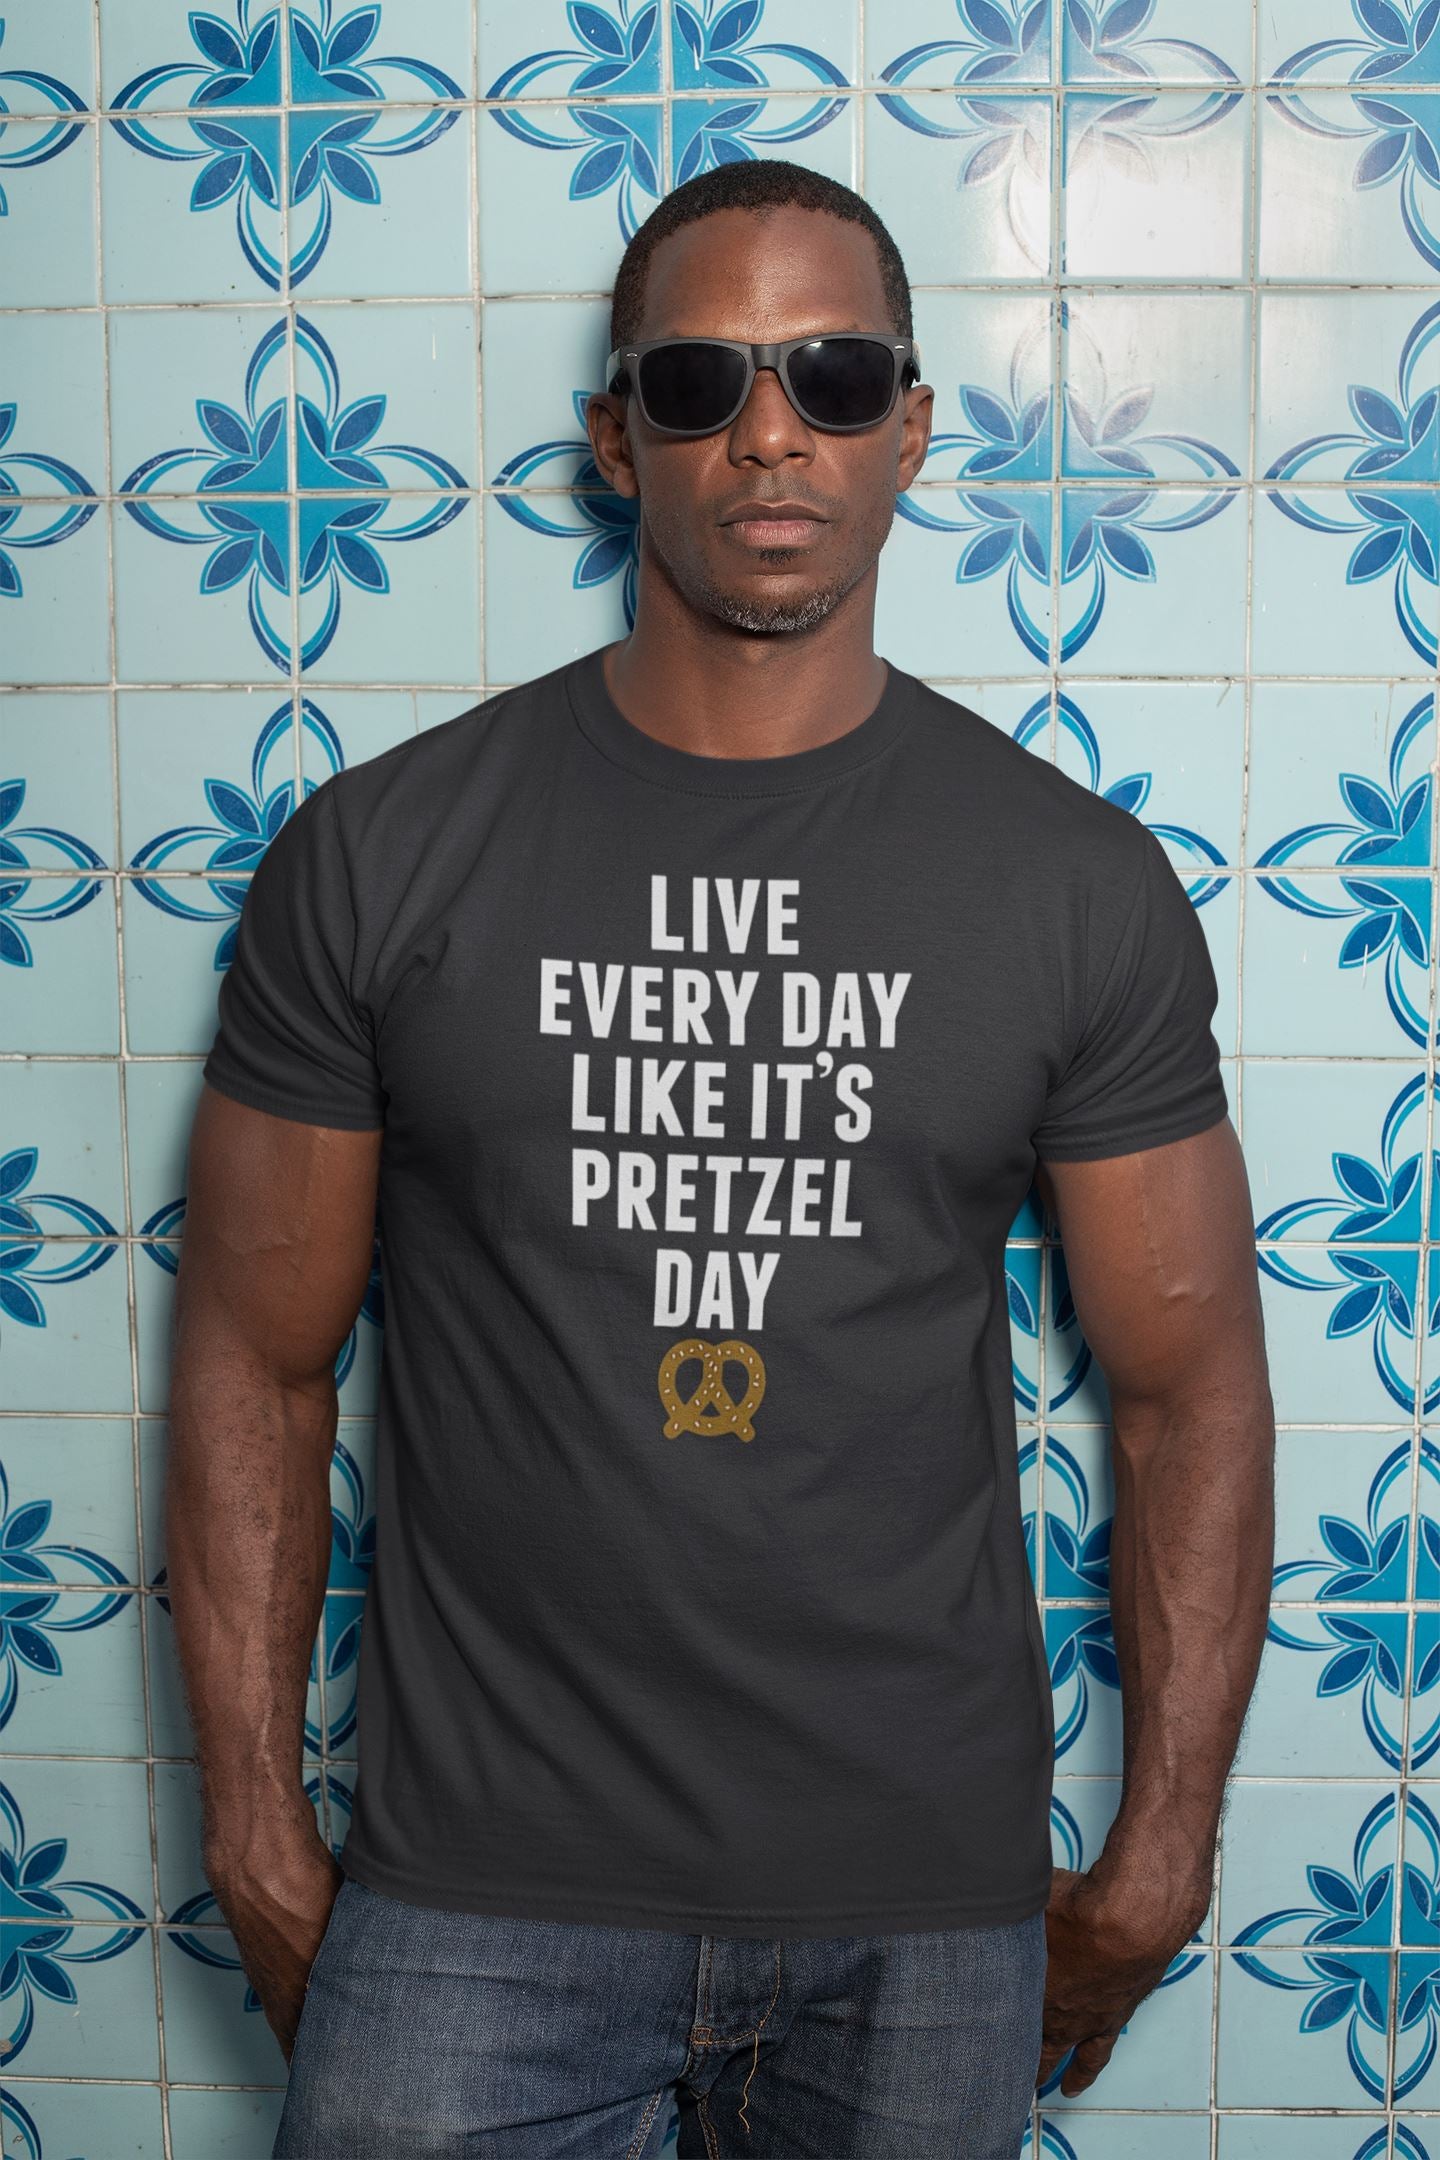 Live Everyday Like It's Pretzel Day Official Stanley Hudson "The Office" T Shirt for Men and Women freeshipping - Catch My Drift India